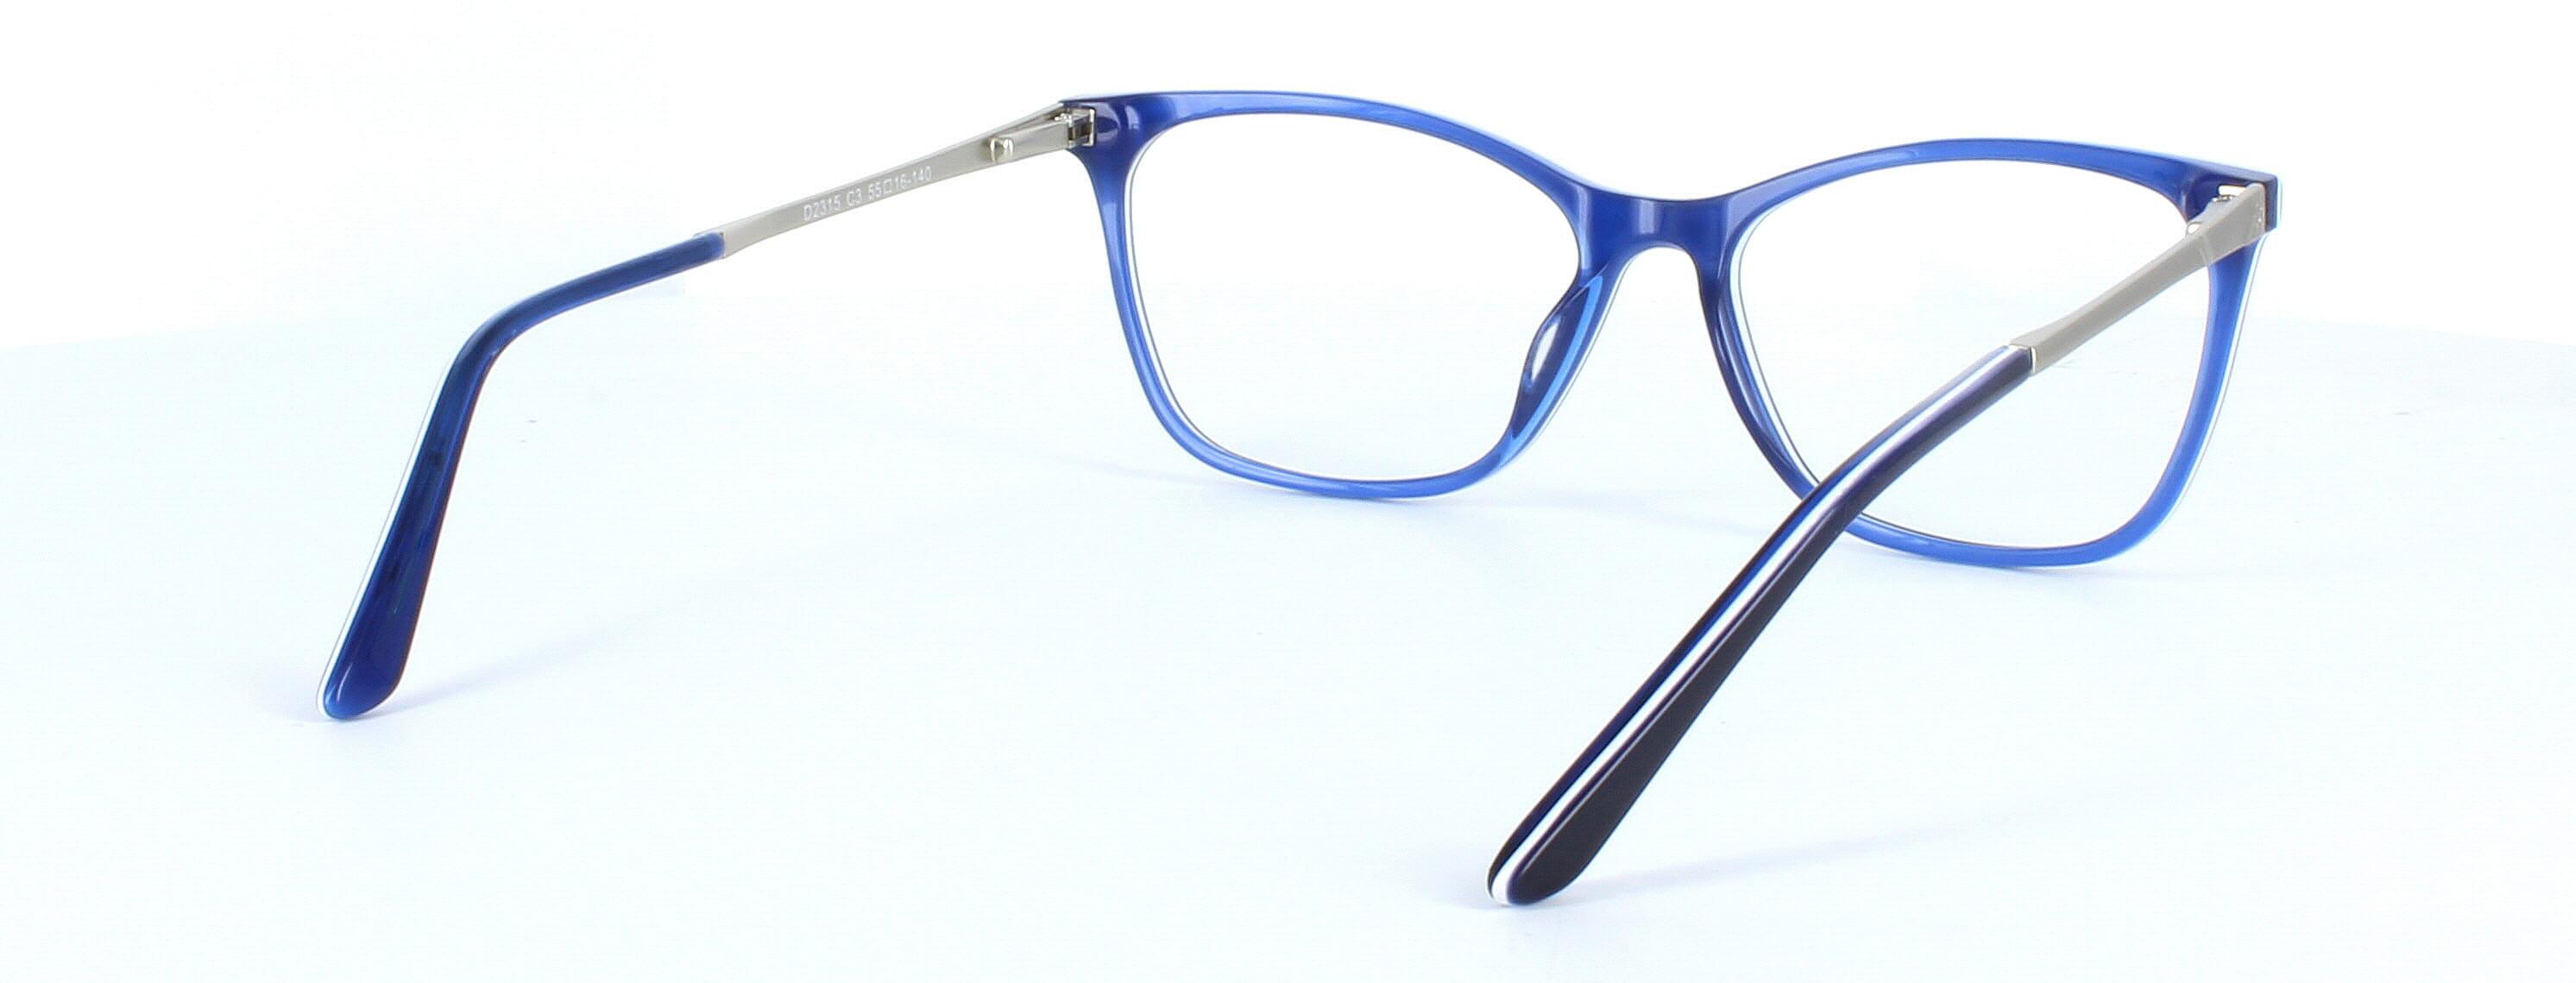 Ballina - ladies cat eye shaped acetate glasses here in blue - image view 4